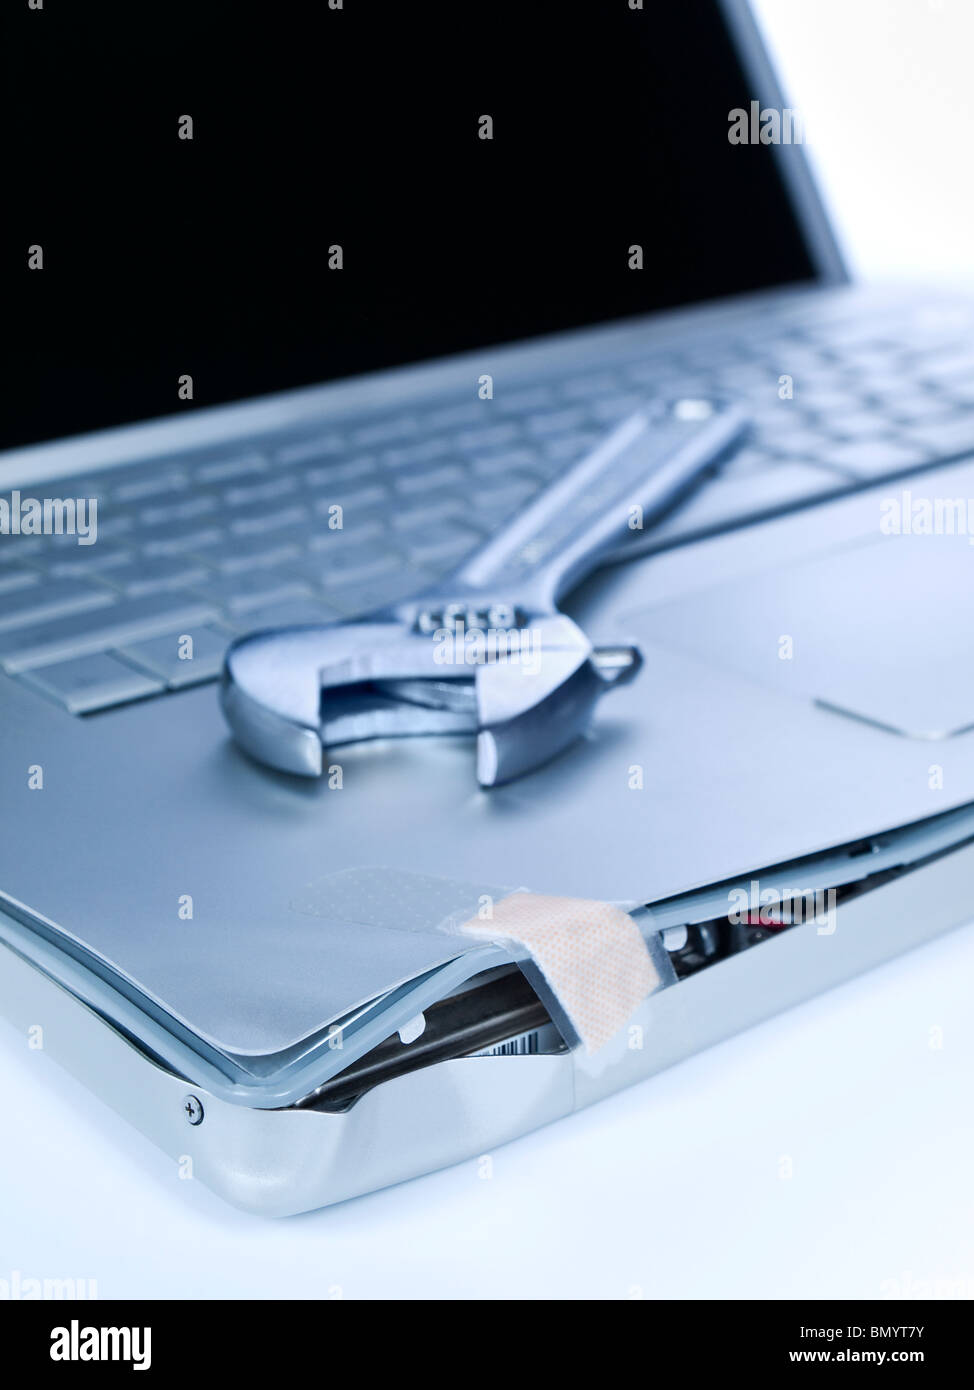 A band aid is fixing a damaged laptop. A spanner is over the computer. Stock Photo